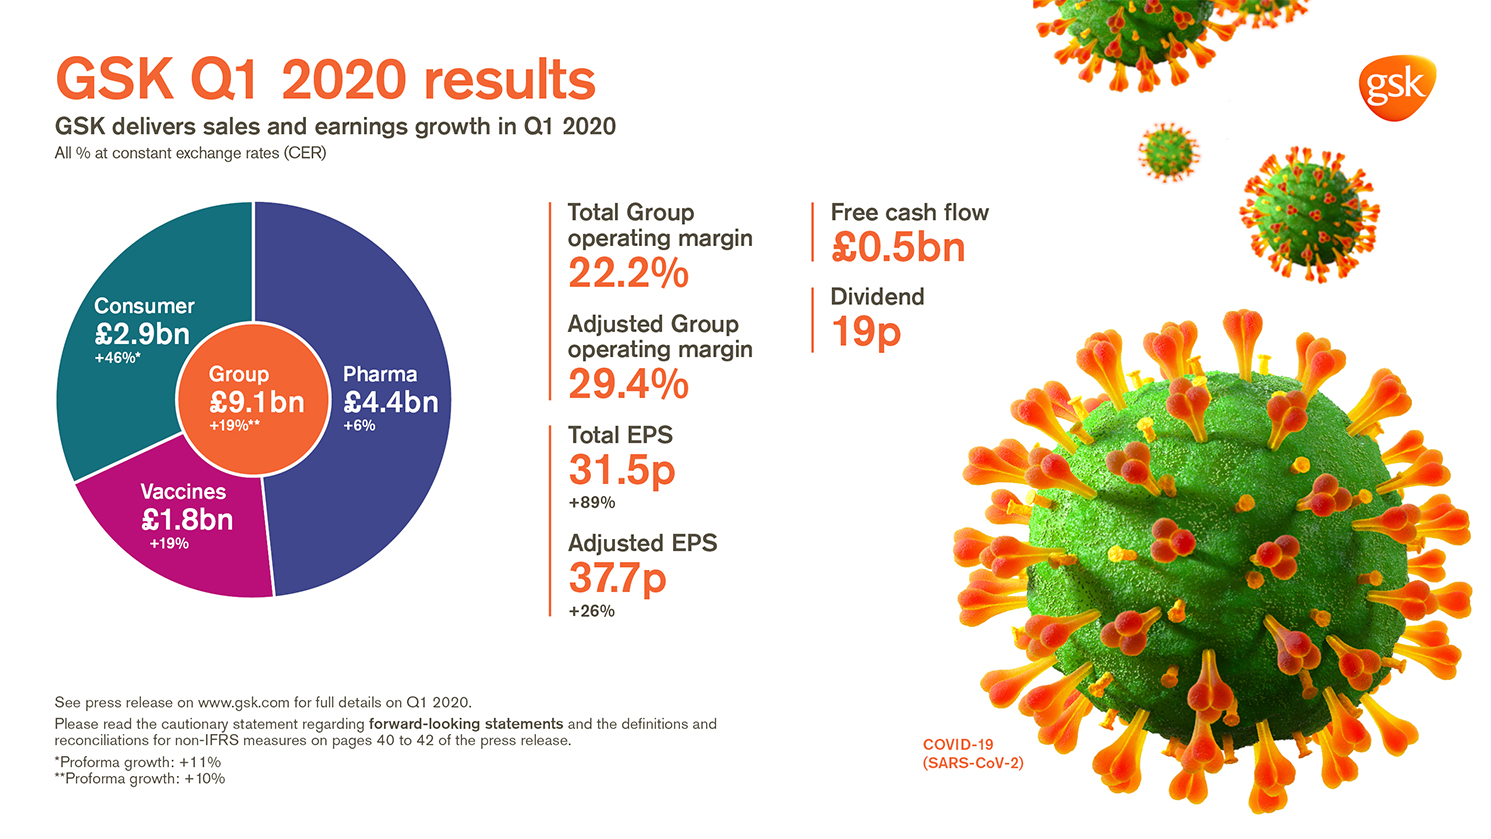 GSK Q1 2020 results infographic and chart